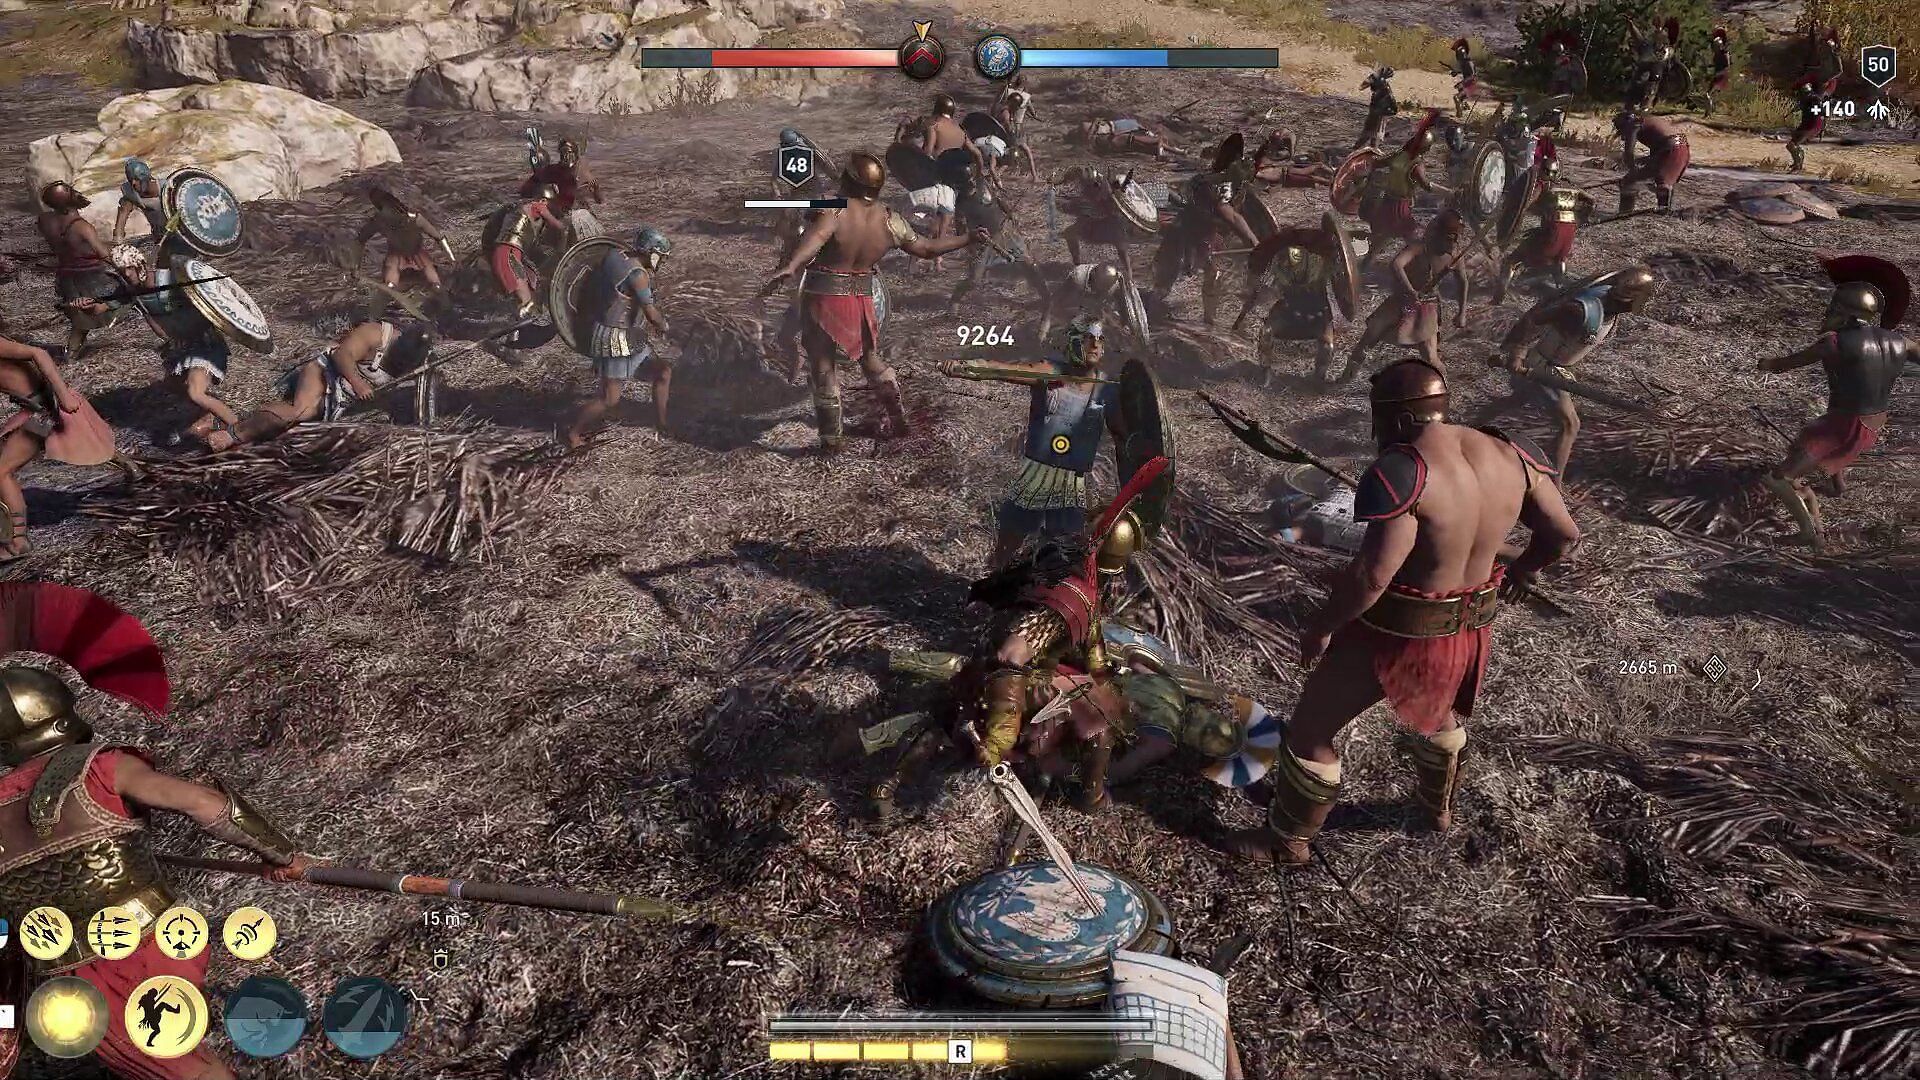 Clashes between Spartan and Athenian armies take place multiple times (Image via Ubisoft)